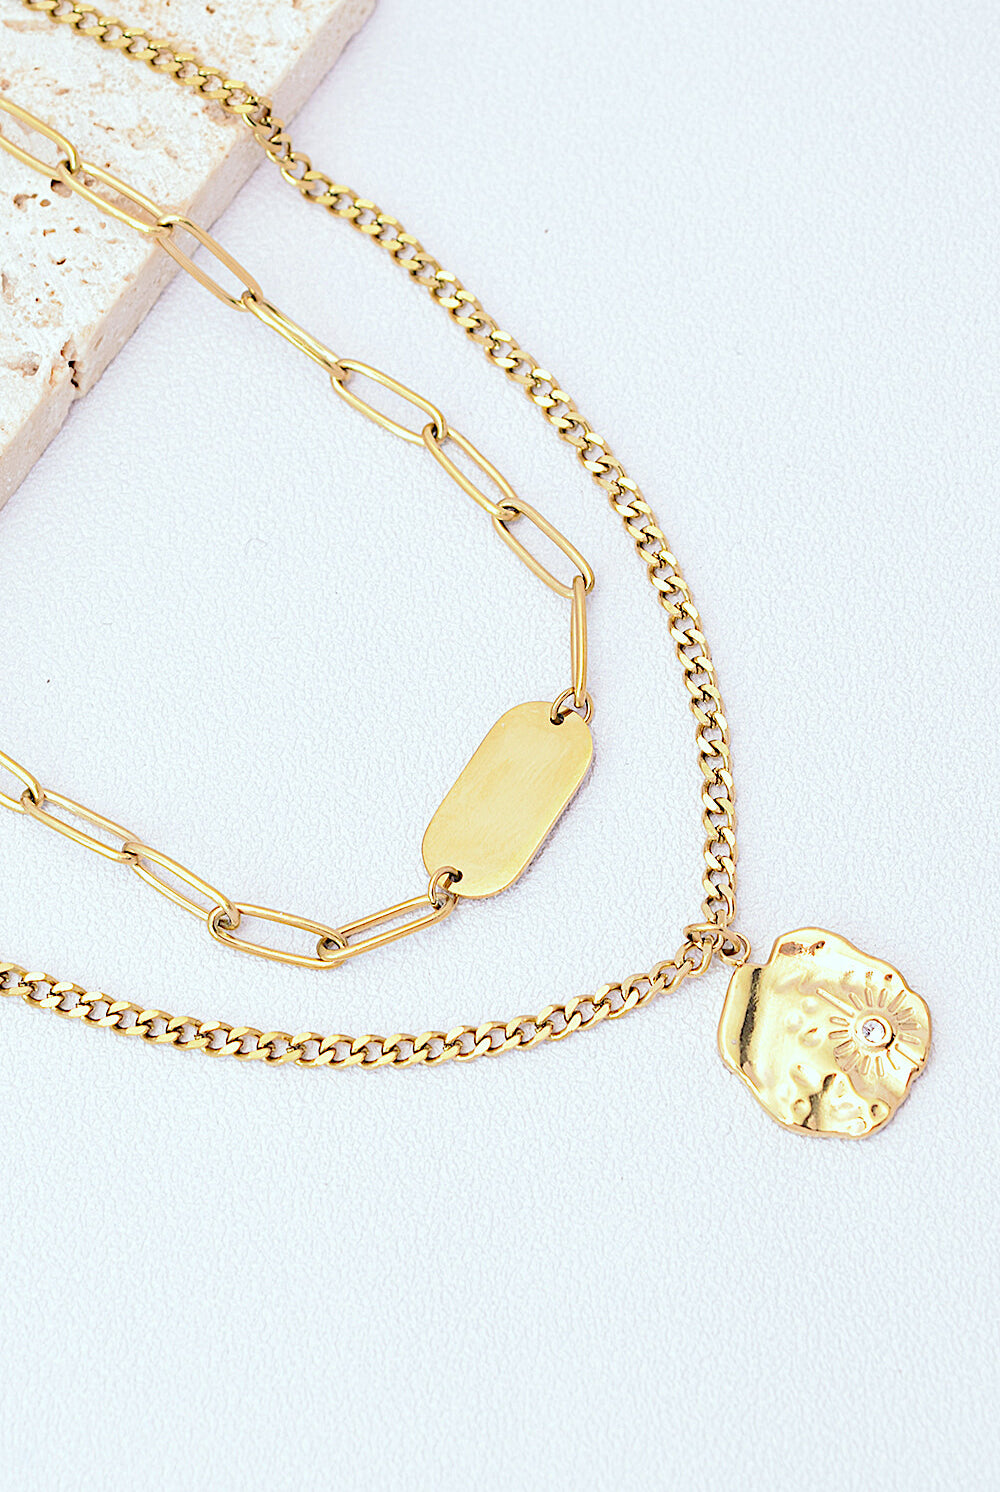 Gold-plated double-layered necklace featuring a bar detail on the upper chain and a detailed circular pendant on the lower chain, set against a white background.